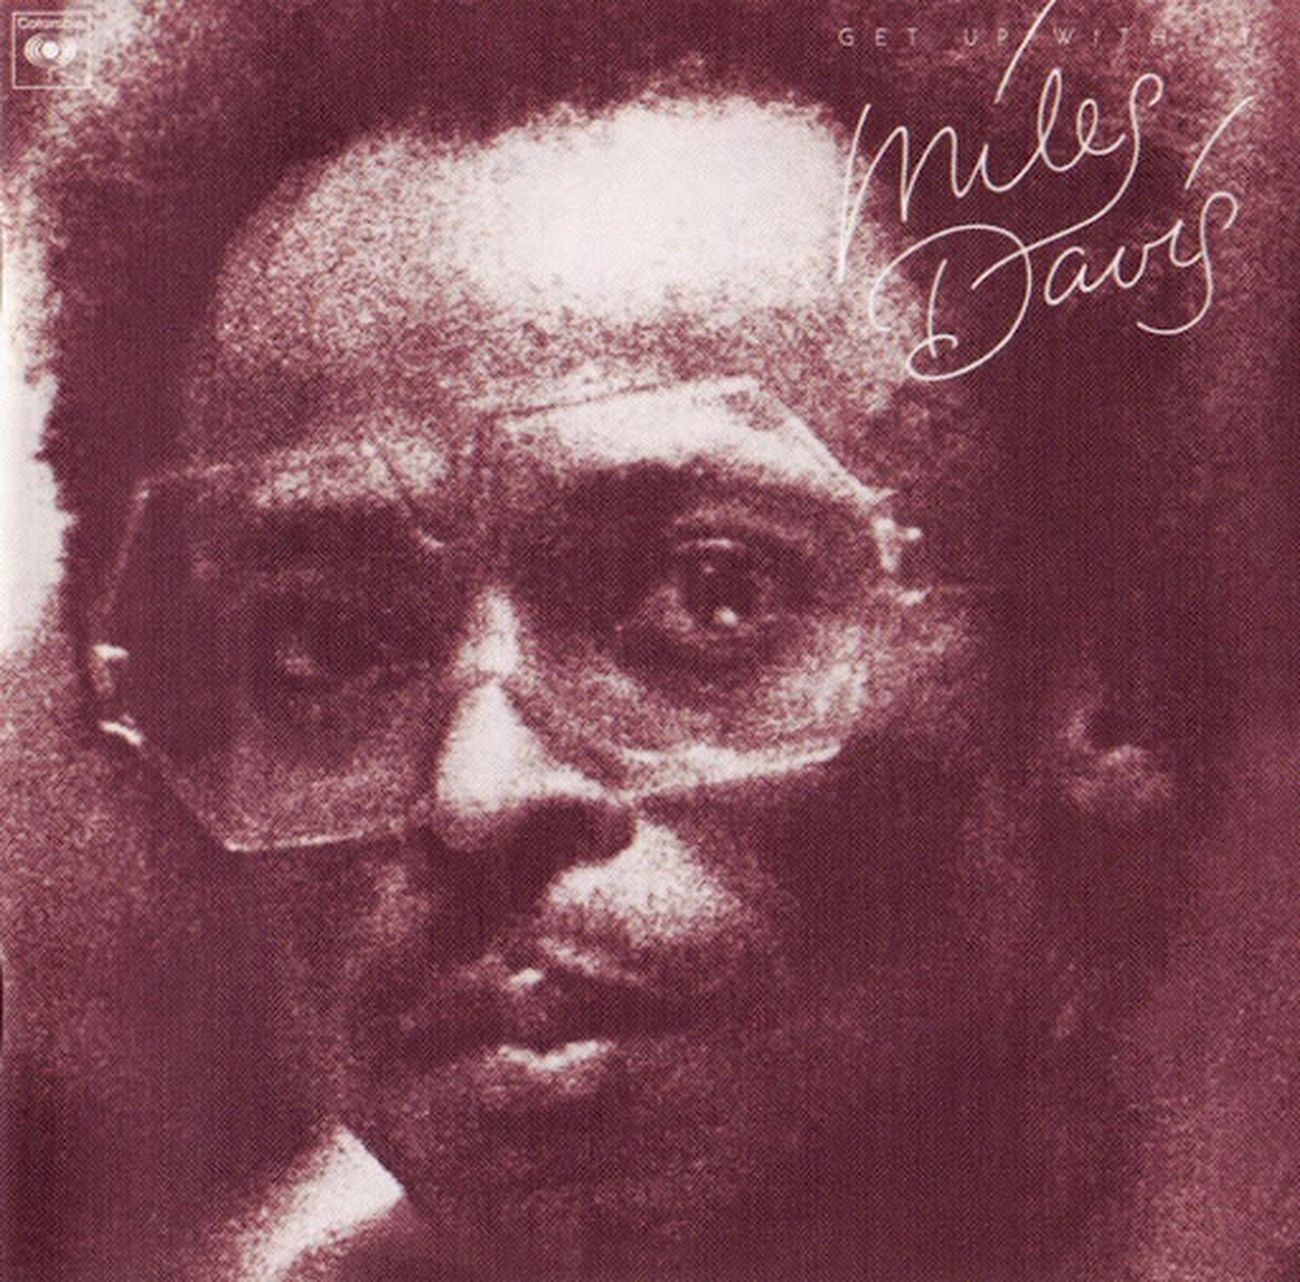 Miles Davis, Get Up With It (1974), cover dell'album